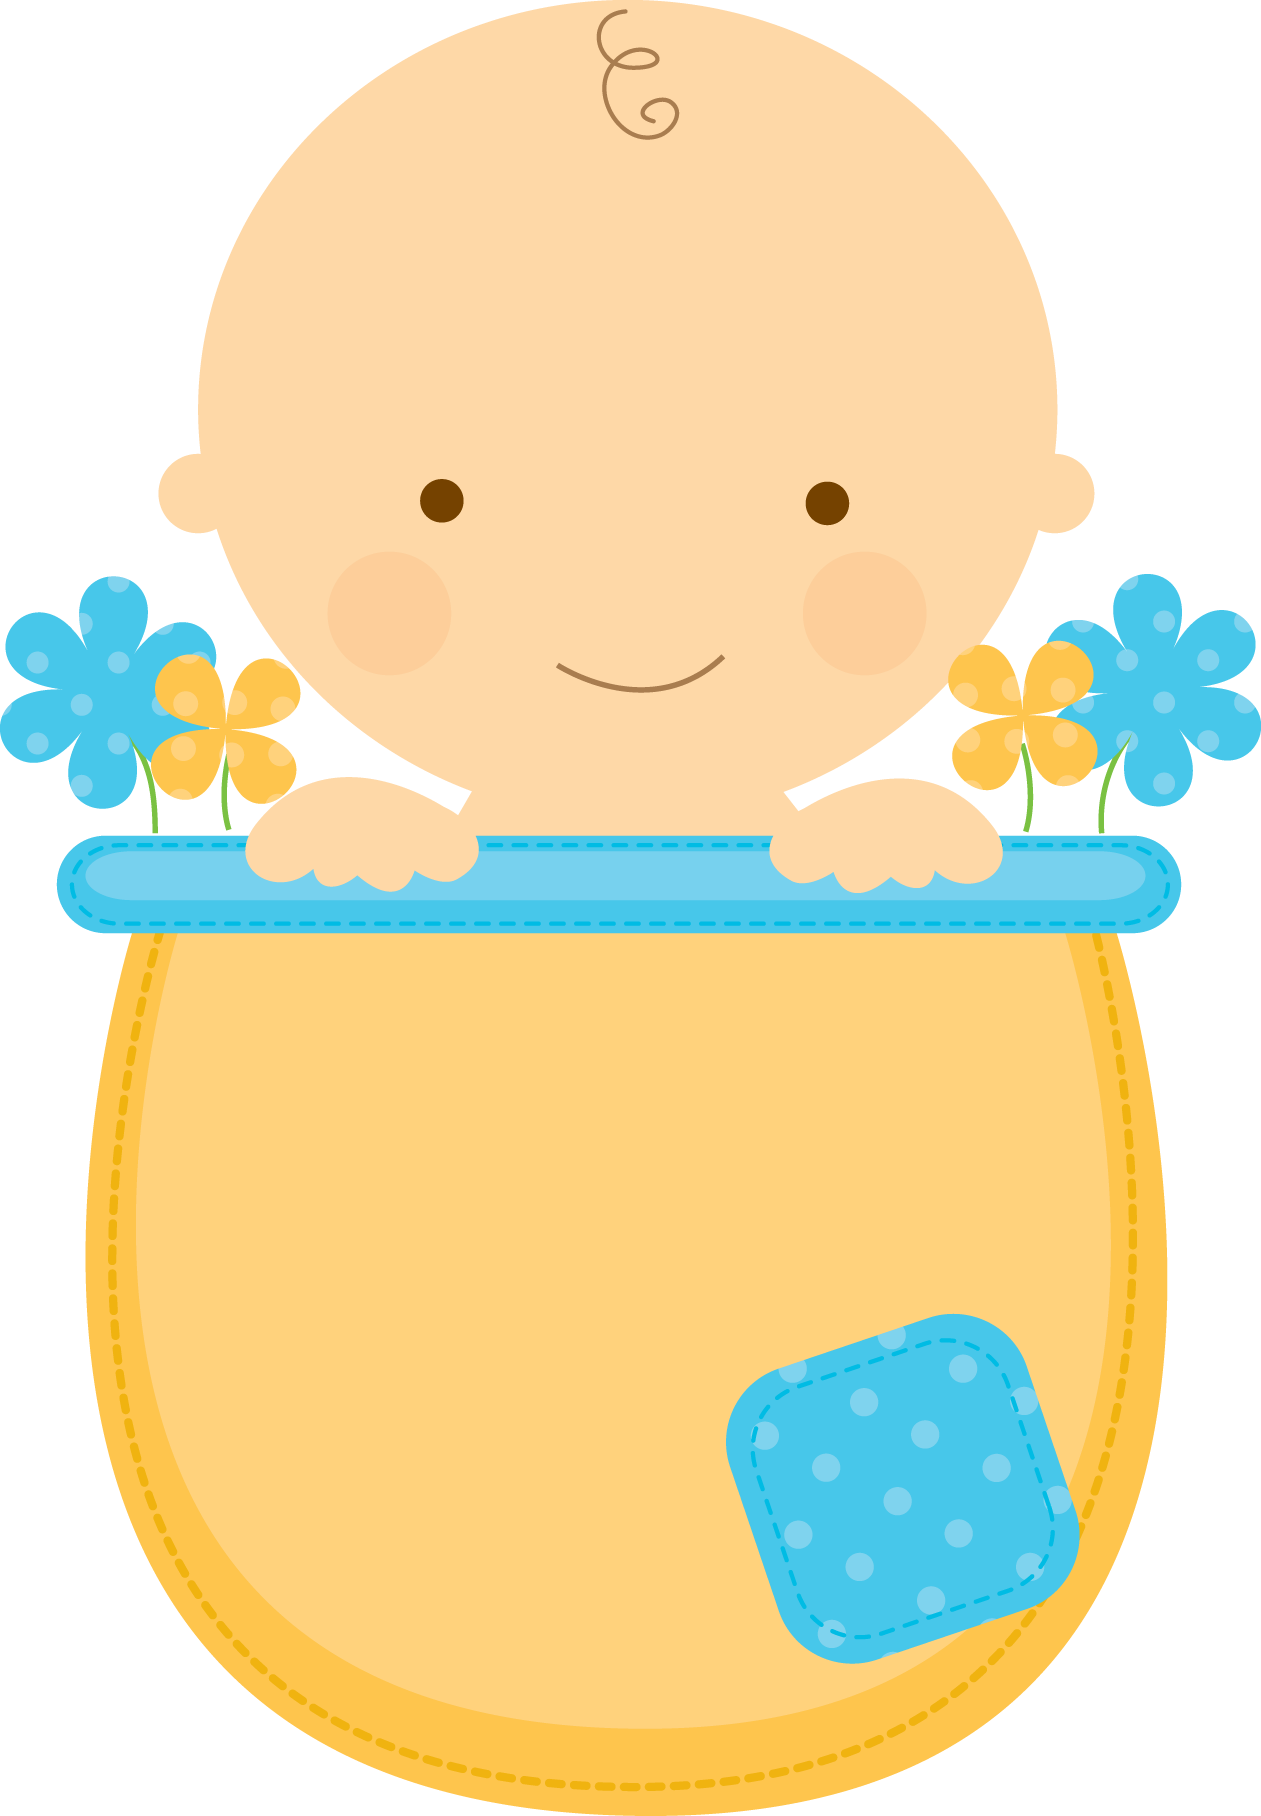 Napkin clipart baby, Napkin baby Transparent FREE for